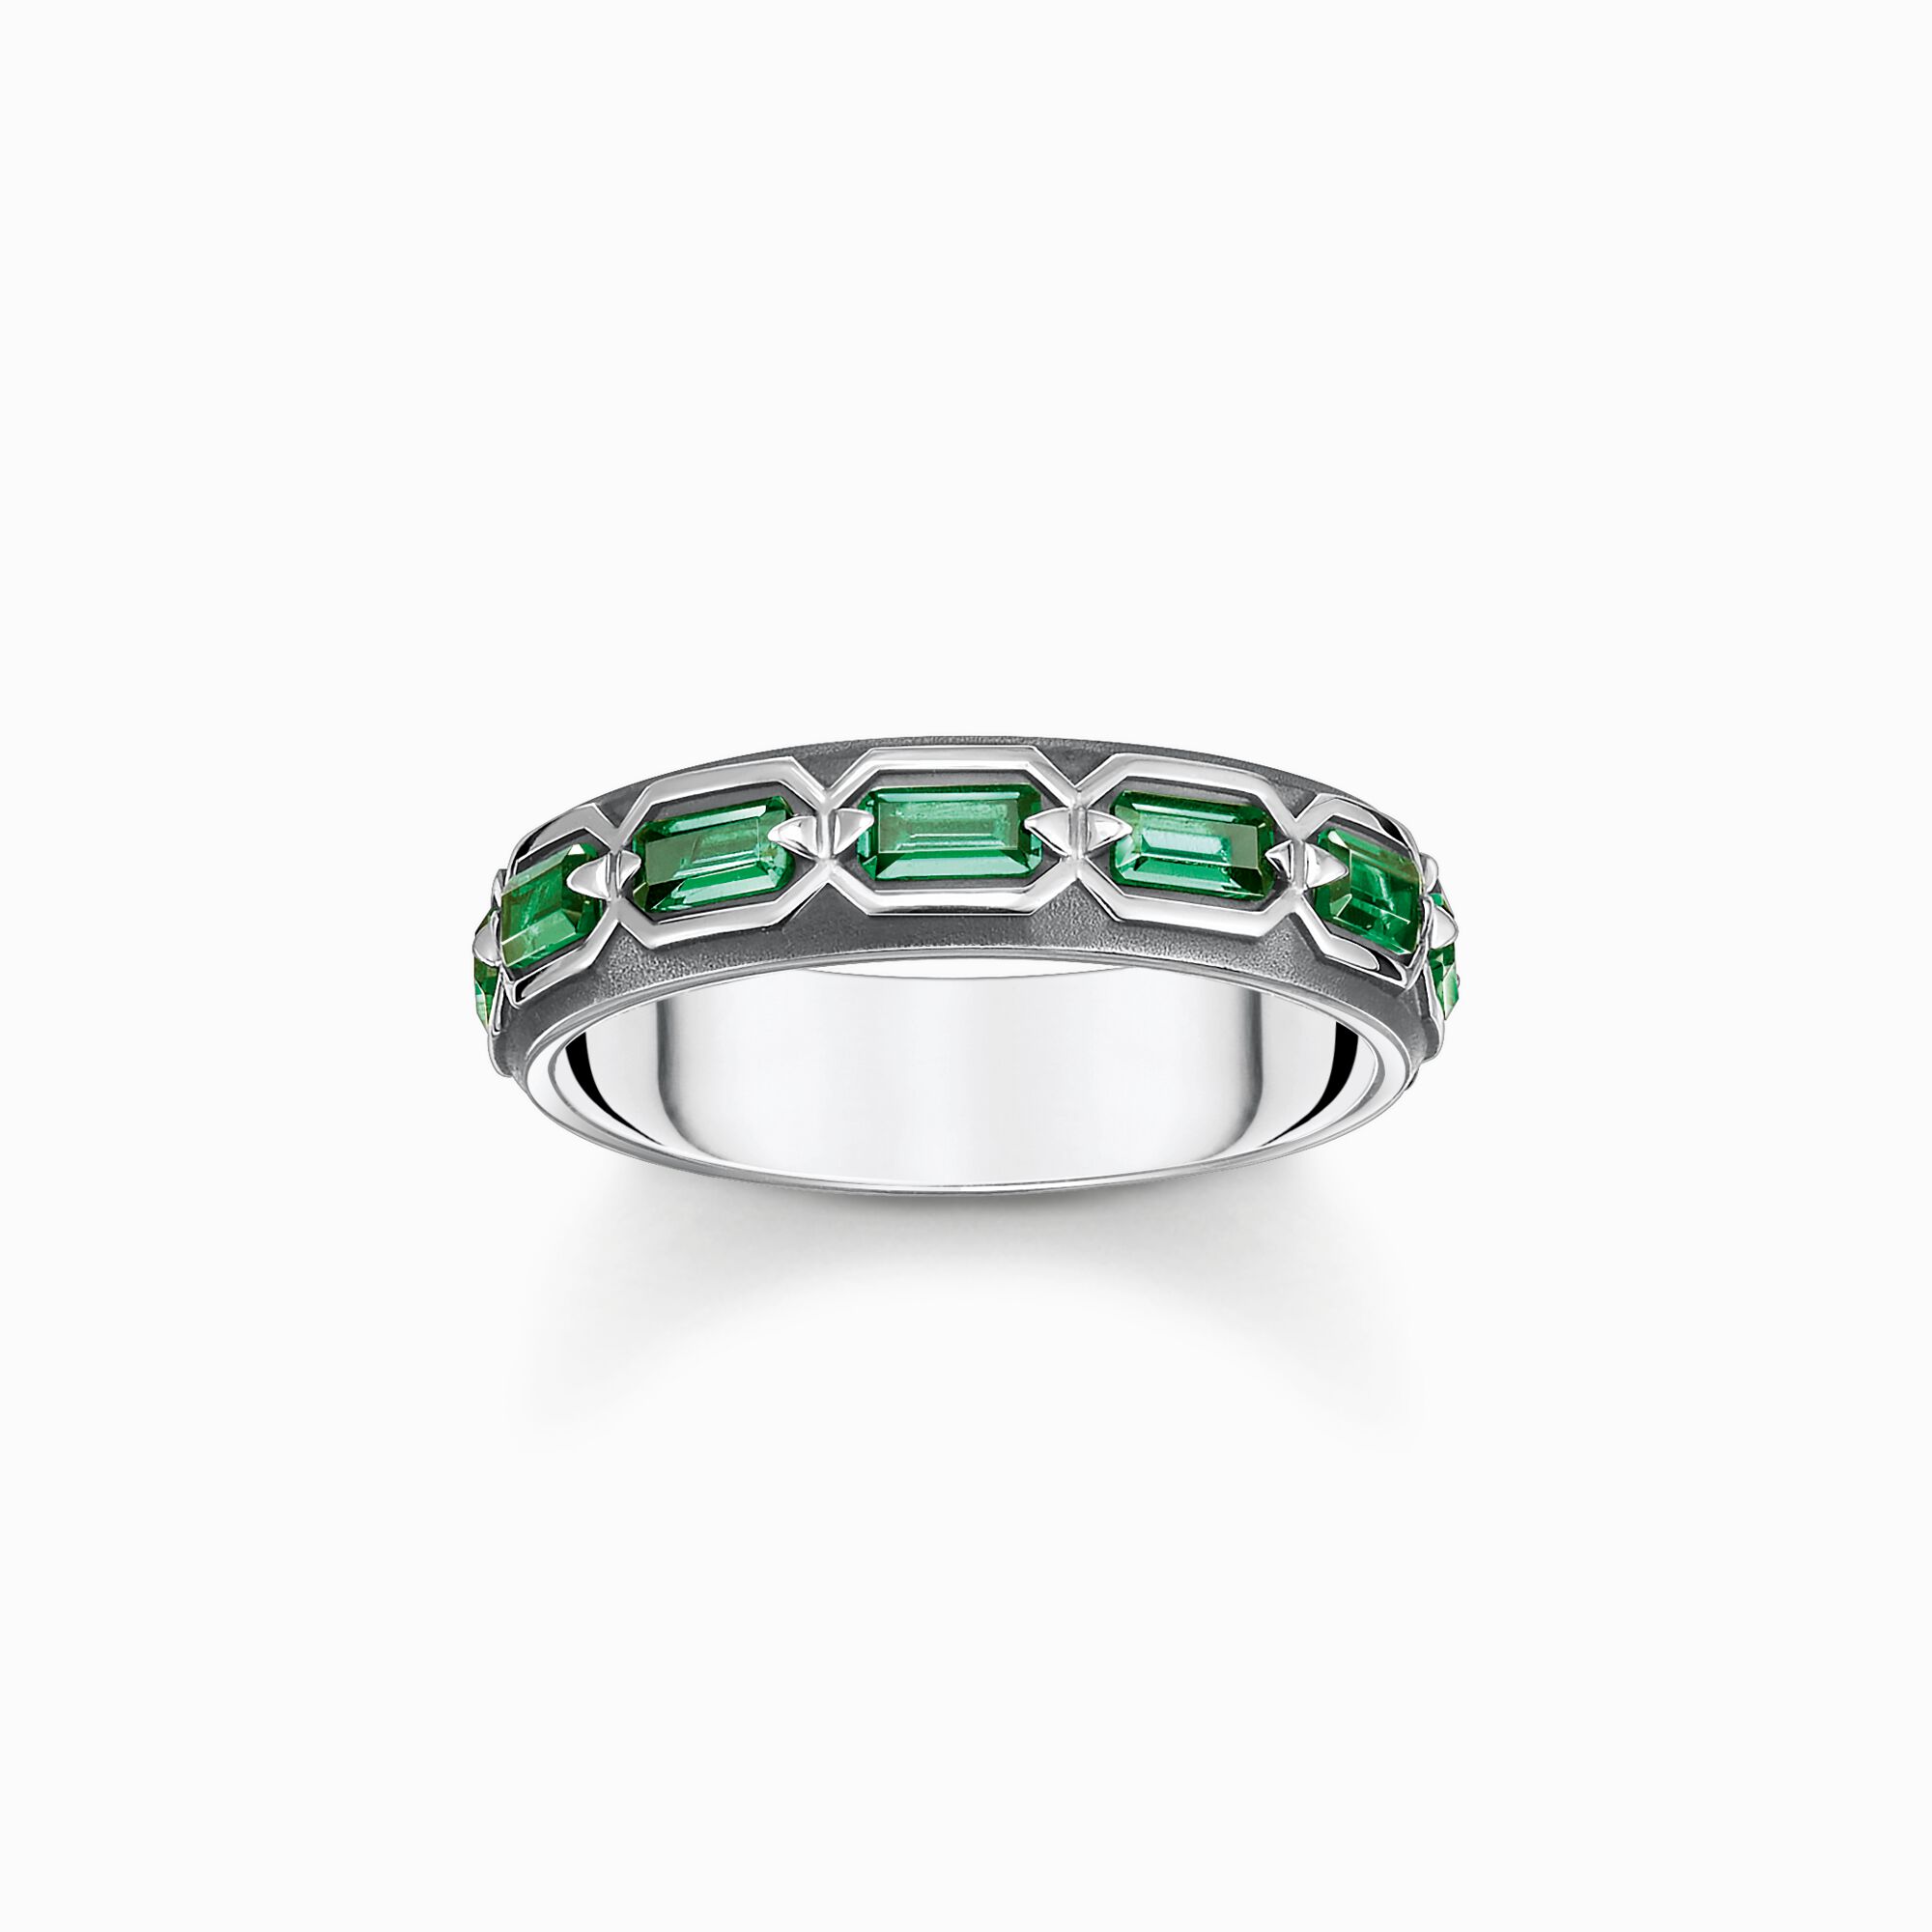 Blackened silver ring crocodile shell with green stones from the  collection in the THOMAS SABO online store